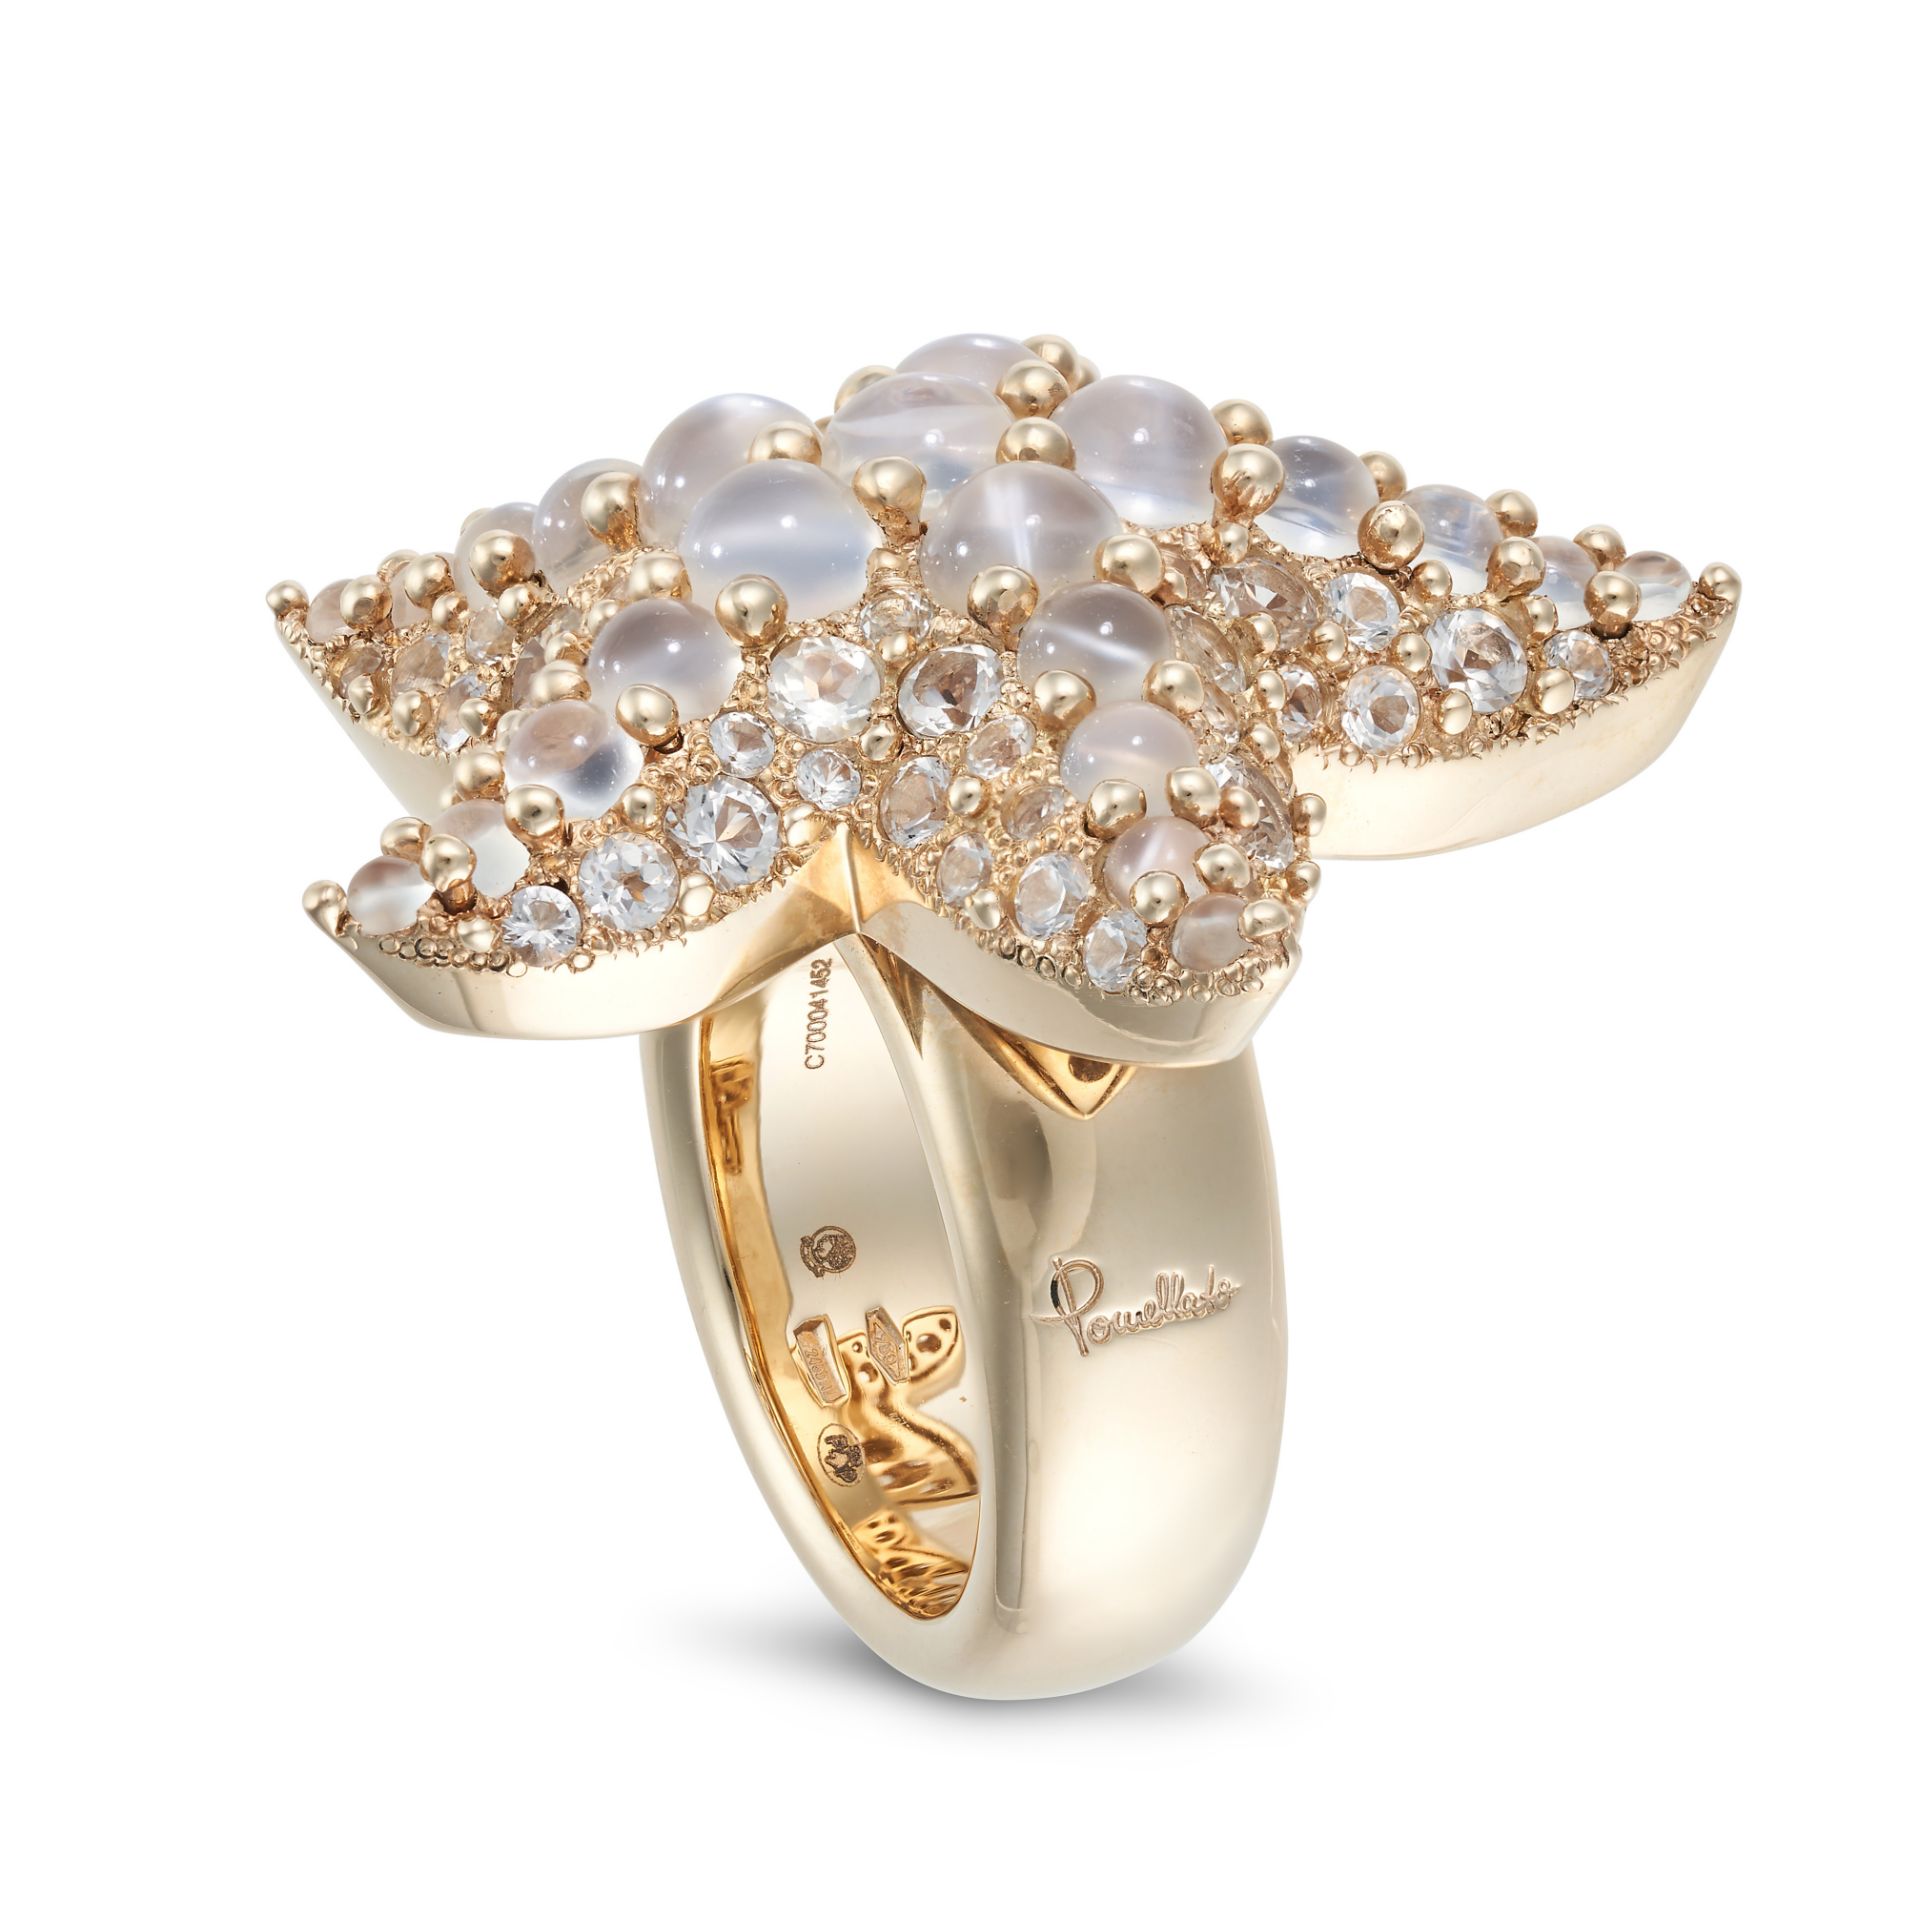 POMELLATO, A MOONSTONE AND WHITE TOPAZ STARFISH RING designed as a starfish, set throughout with ... - Bild 2 aus 2